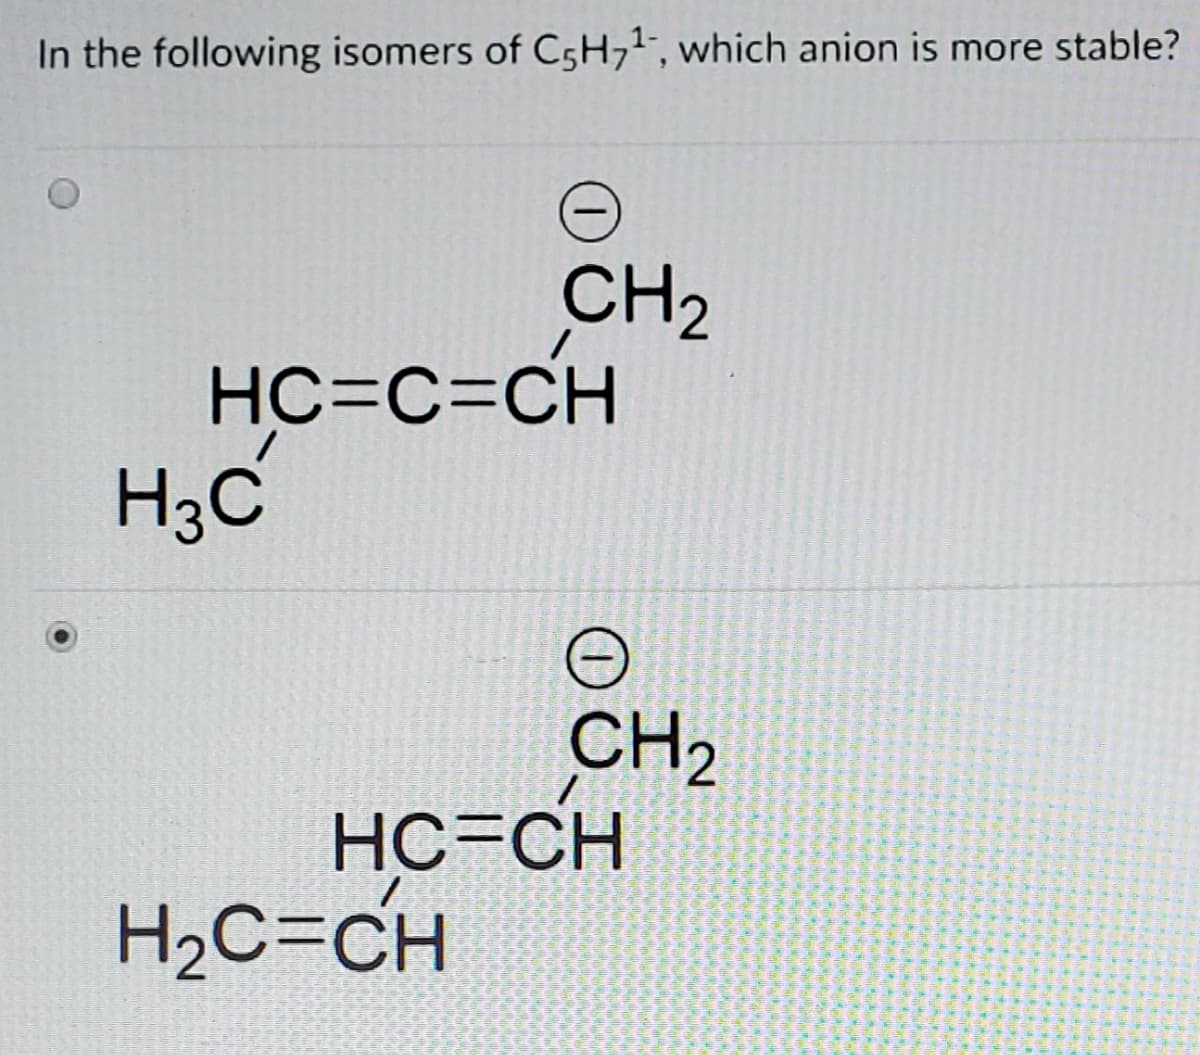 In the following isomers of CsH71", which anion is more stable?
CH2
HC=C=CH
H3C
CH2
HC=CH
H2C=CH
